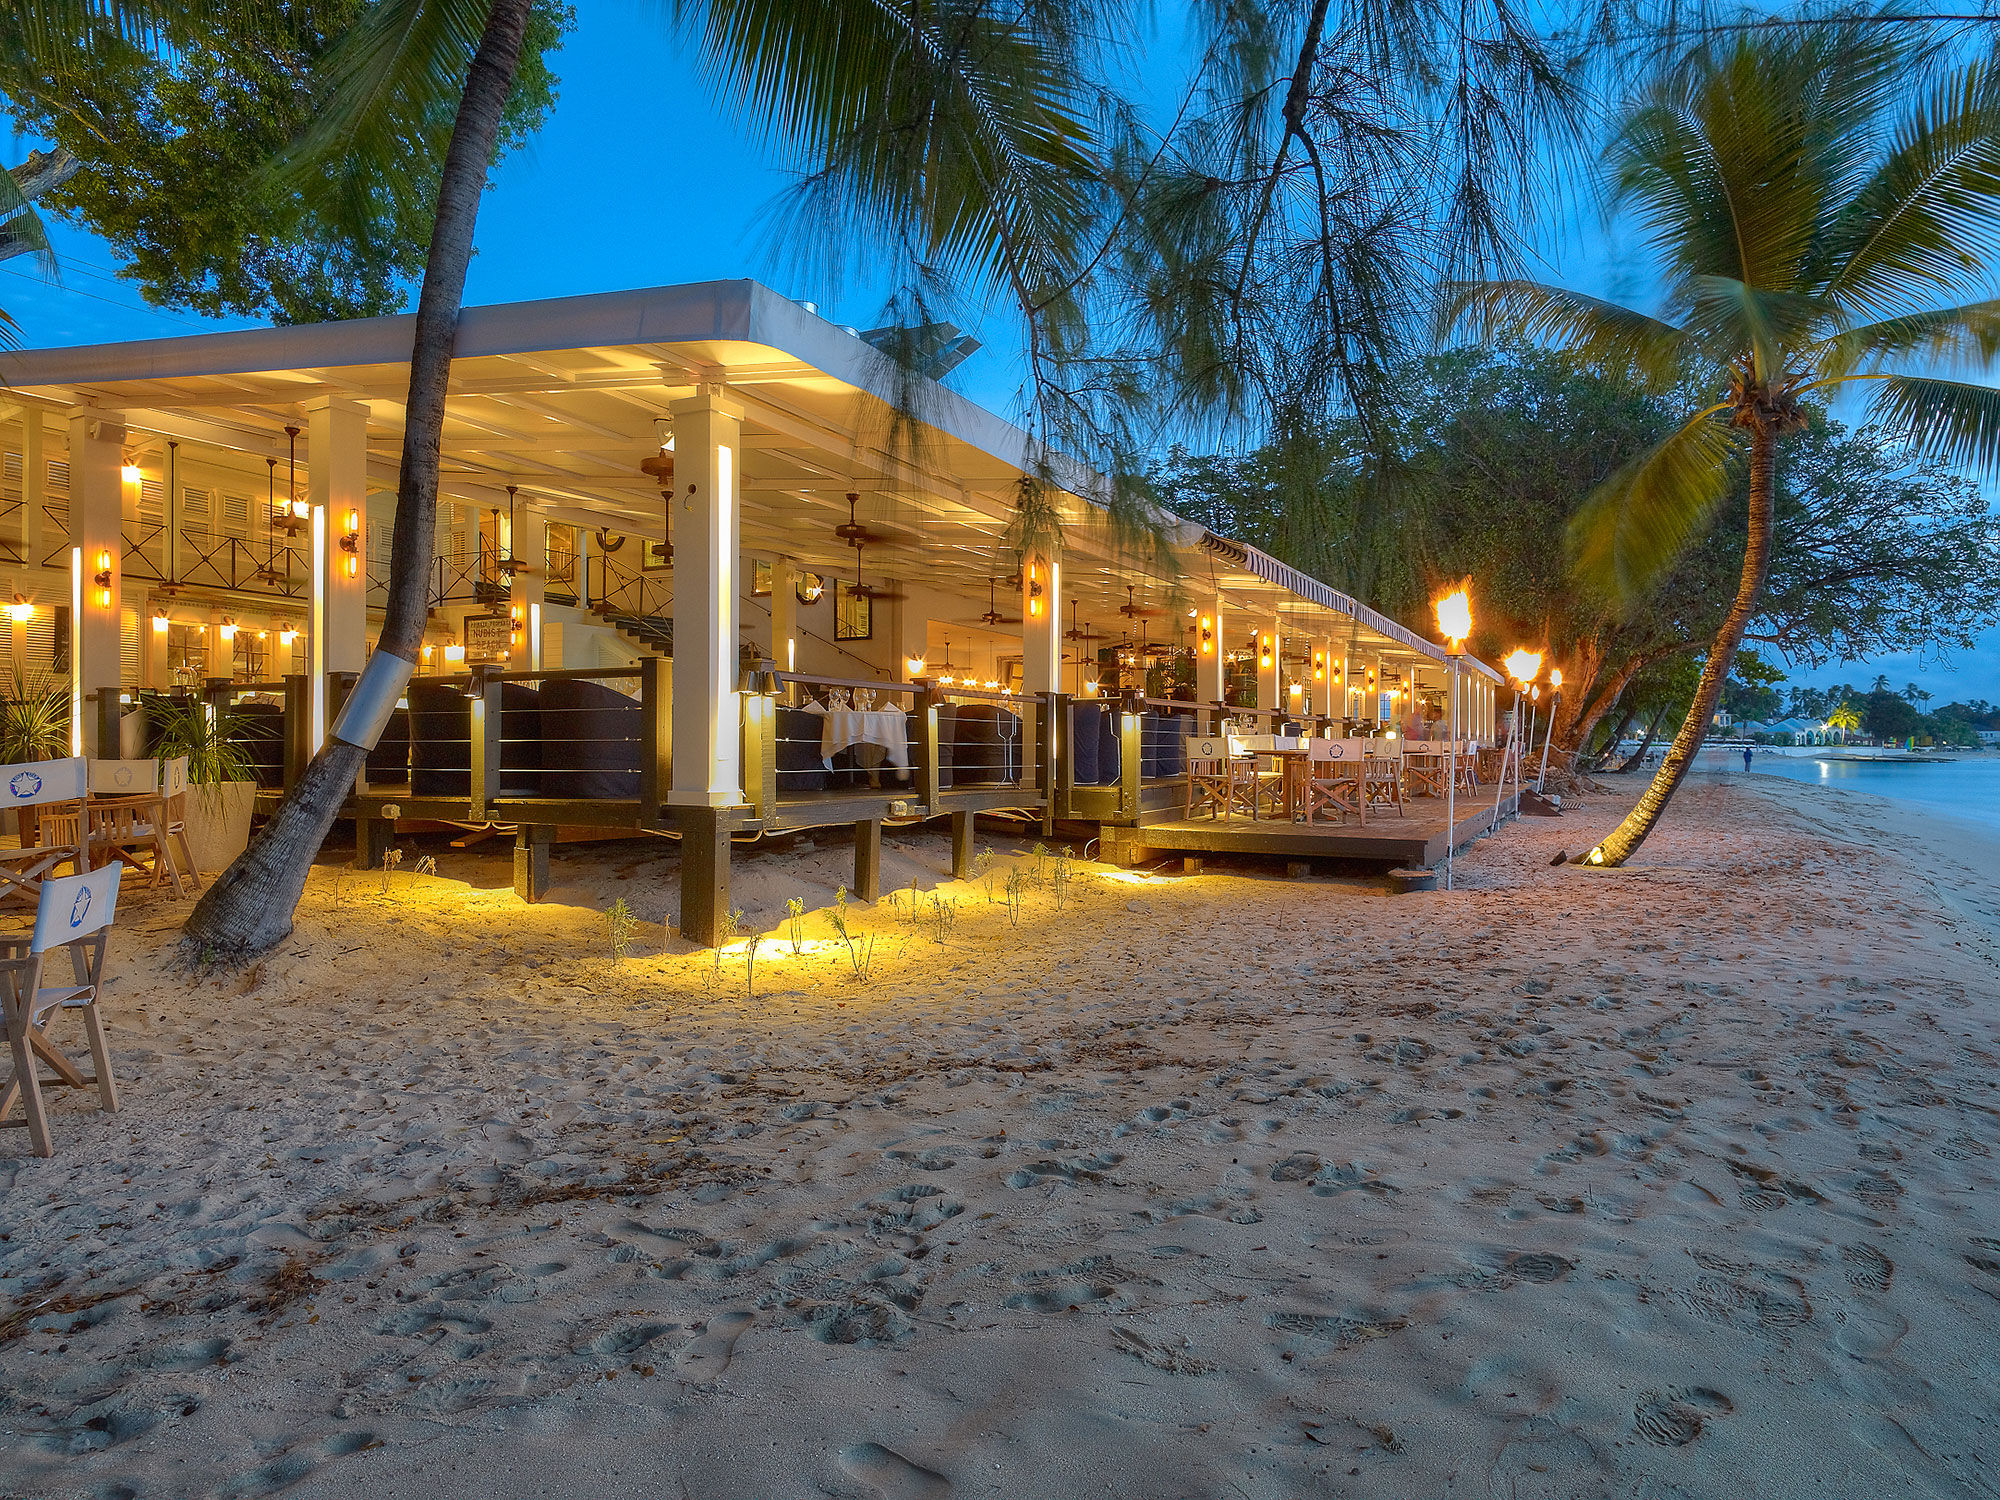 The Lone Star is a popular beachfront boutique hotel